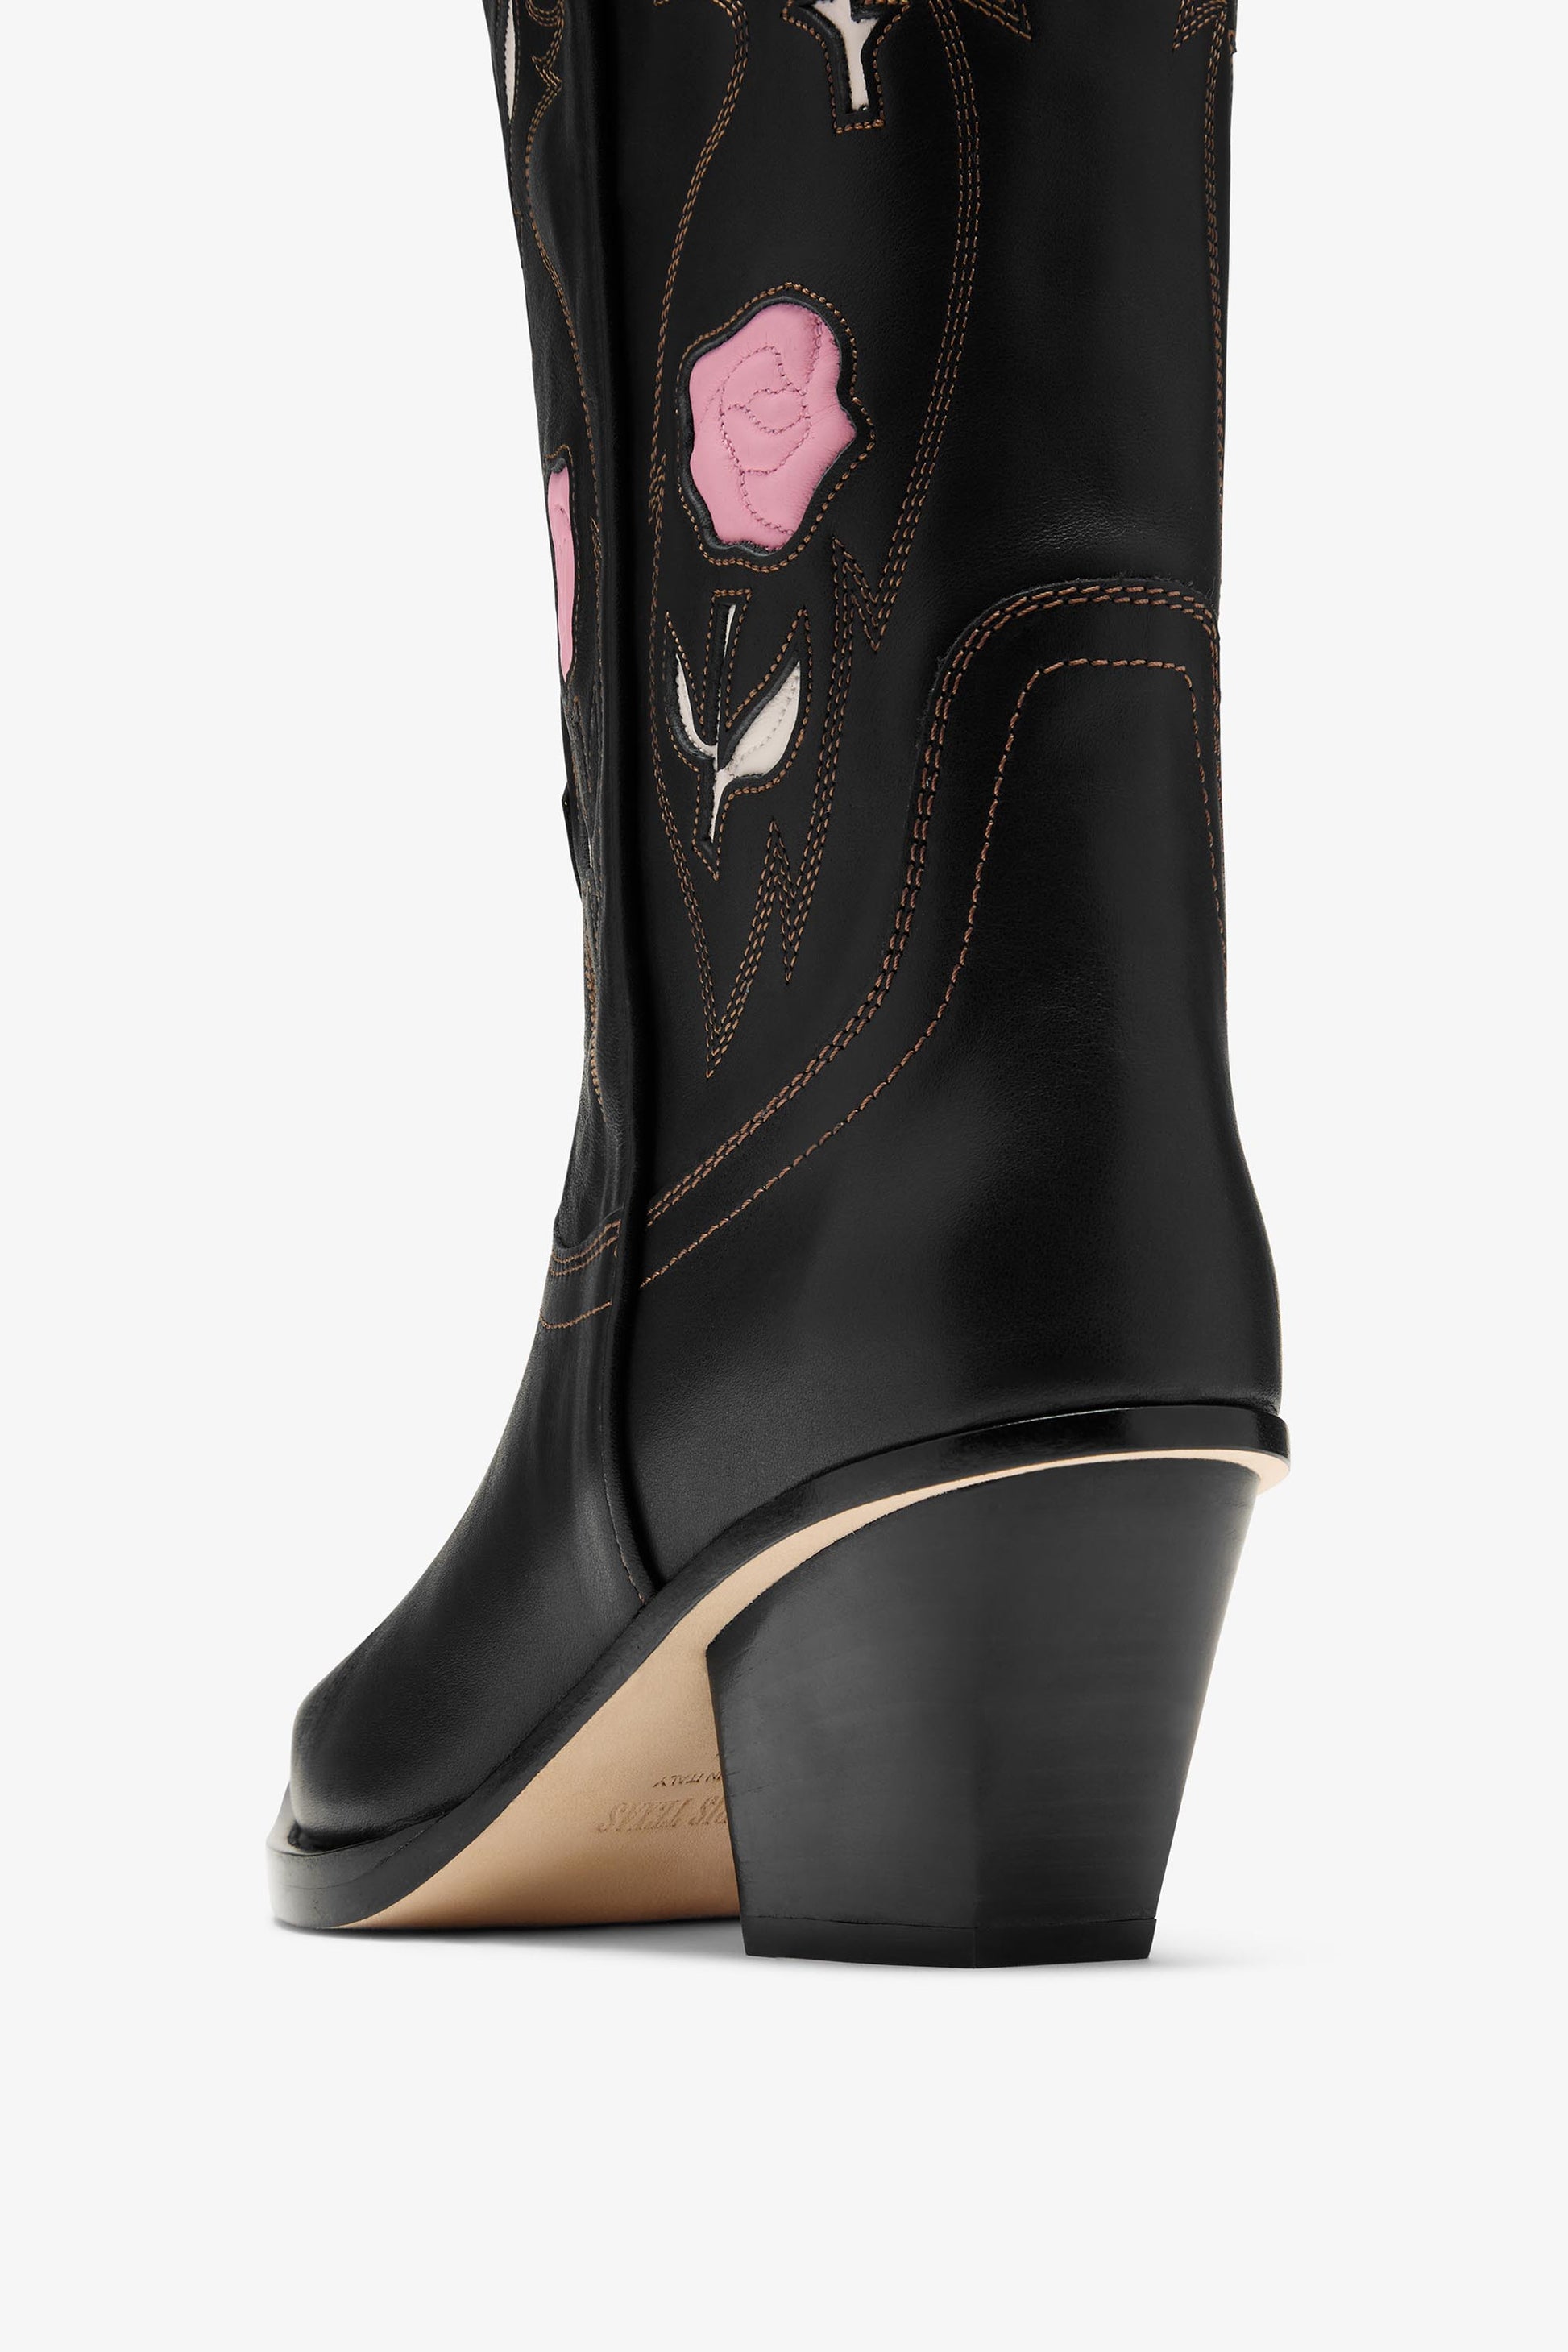 Embroidered black leather Texan boot